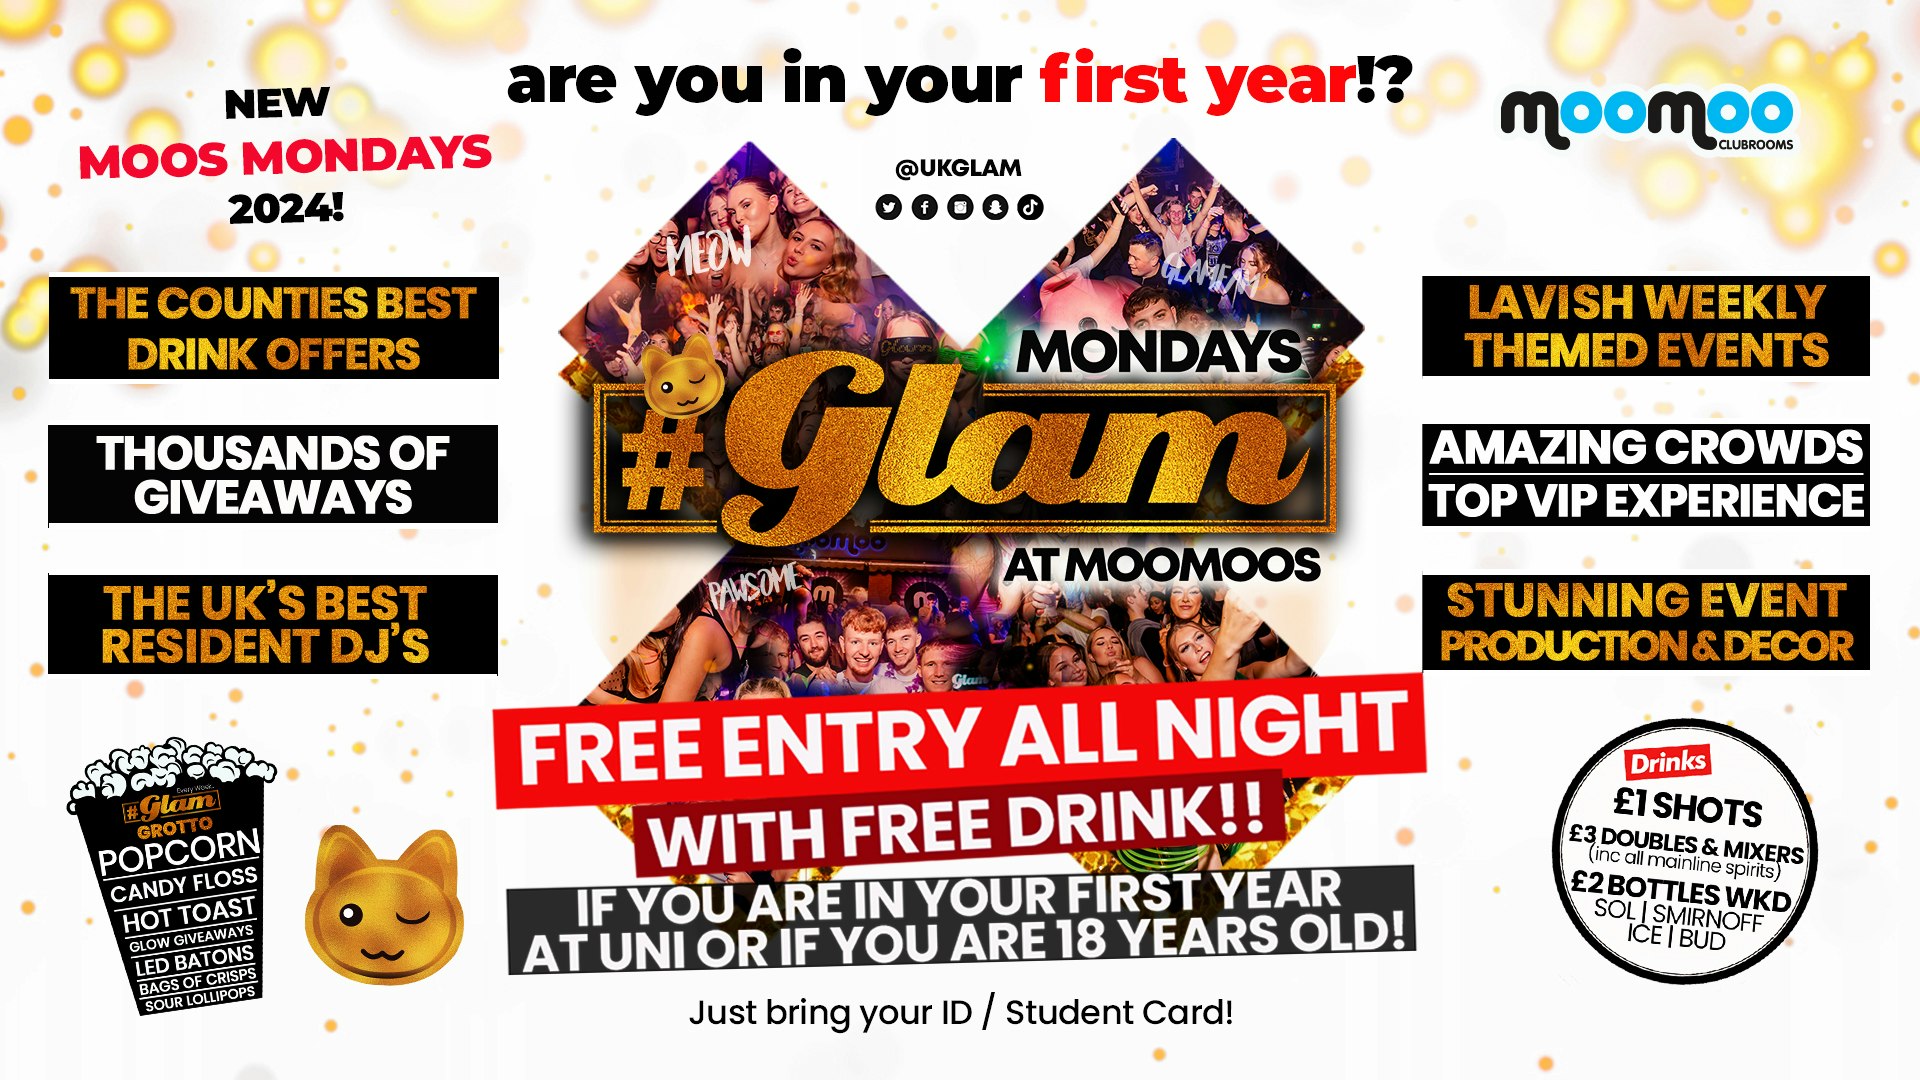 TONIGHT – FREE TICKETS WITH SHOT Glam – Gloucestershire’s Biggest Monday  – FREE TICKETS WITH SHOT